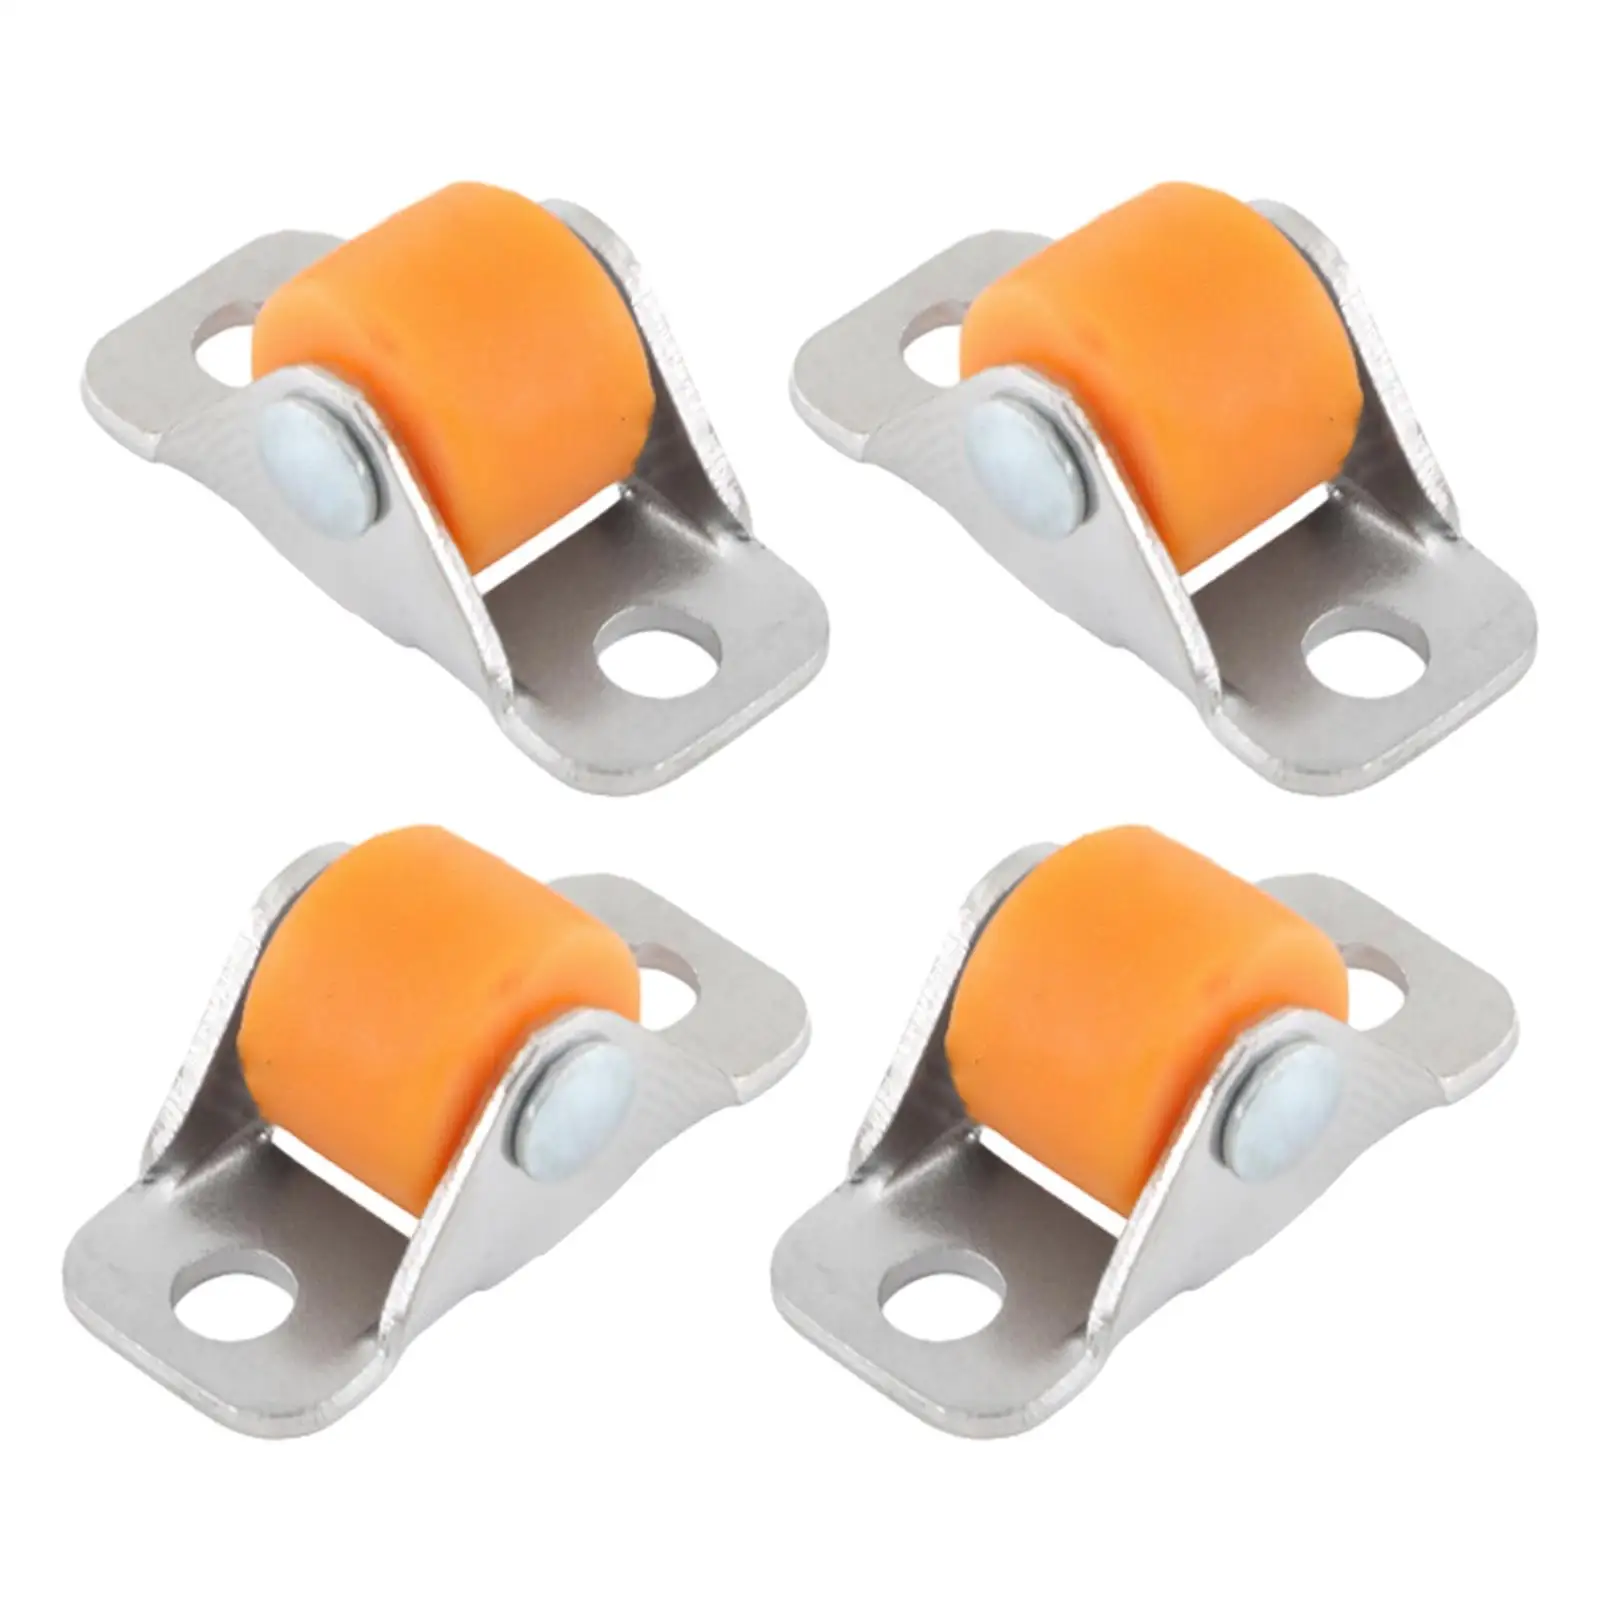 4 Pieces Silent Multipurpose Fixed Castor Wheels Small Rubber Caster Set for Shelves Table Shopping Carts Workbench Cupboard